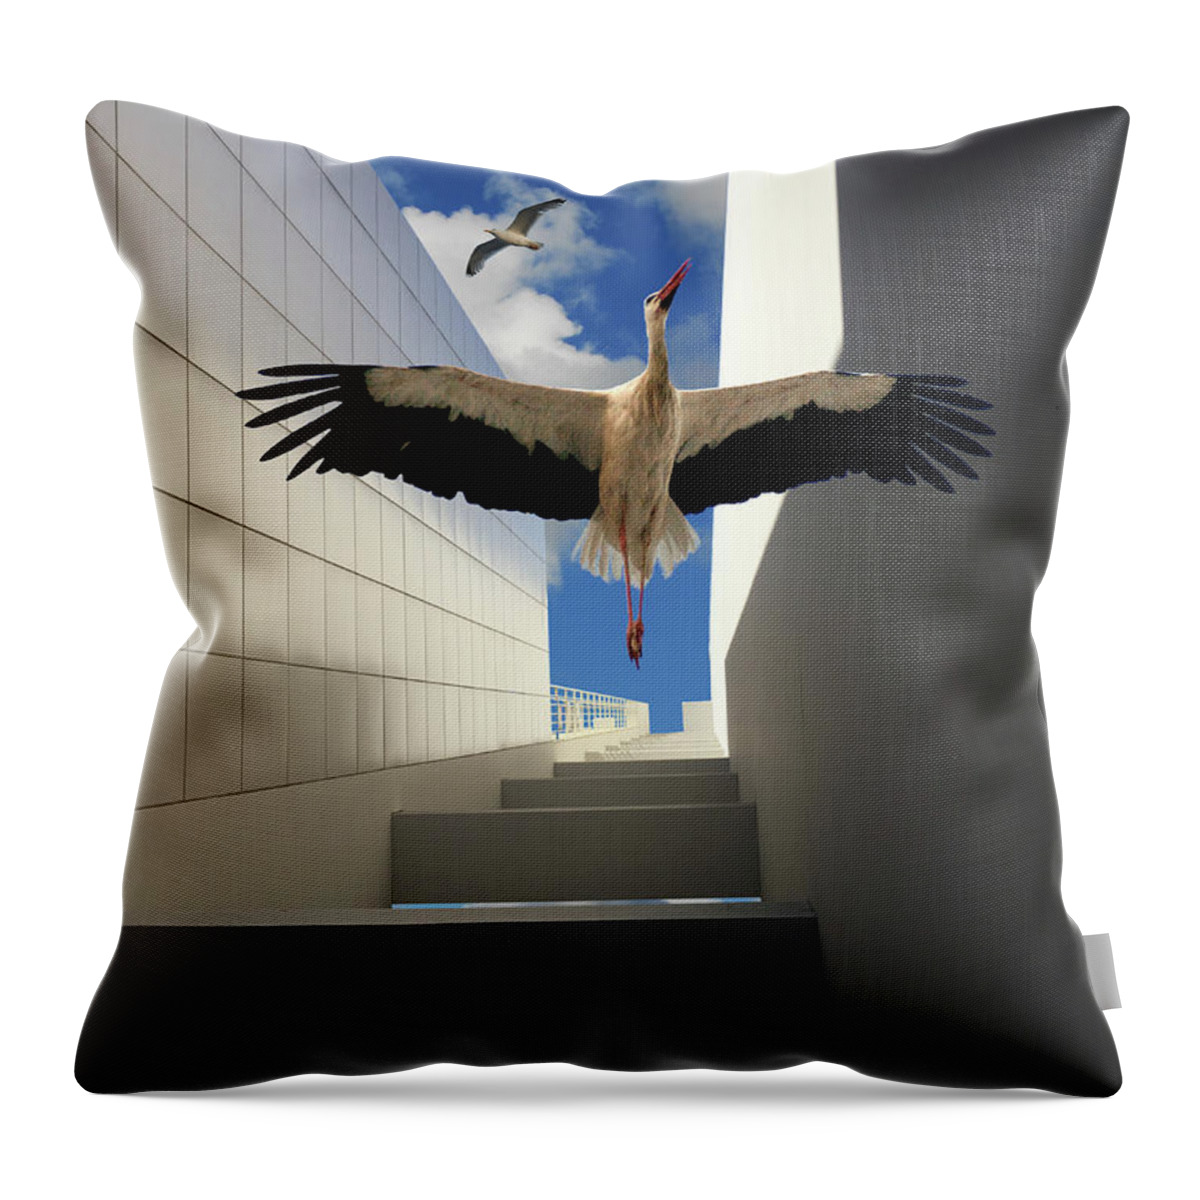 Surreal Throw Pillow featuring the photograph Soaring by Harry Spitz